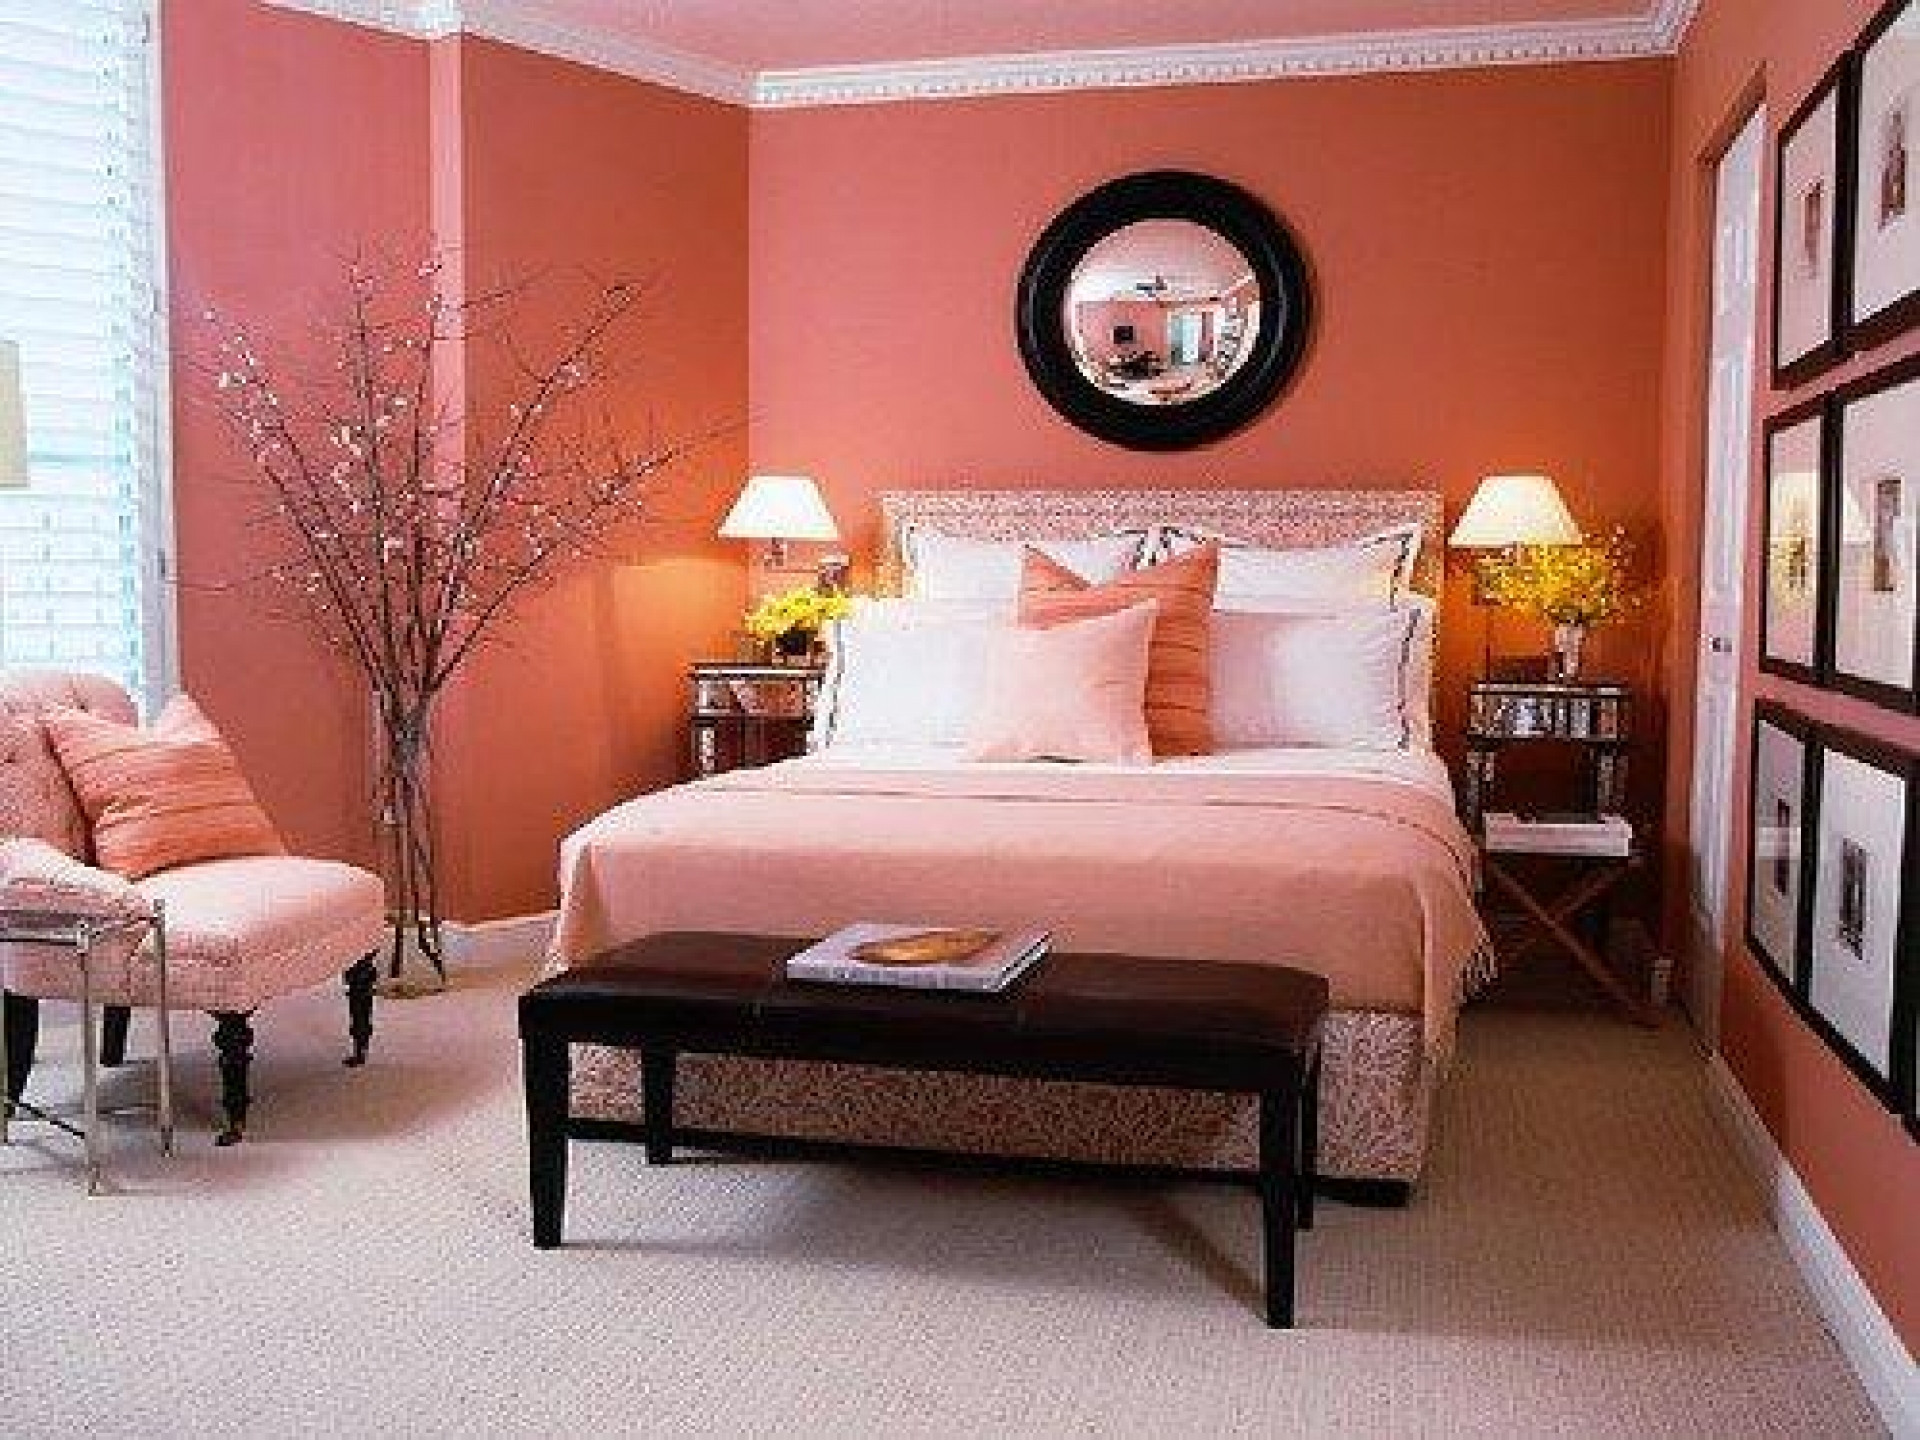 Beautiful Bedroom Colors
 25 Beautiful Bedroom Ideas For Your Home – The WoW Style